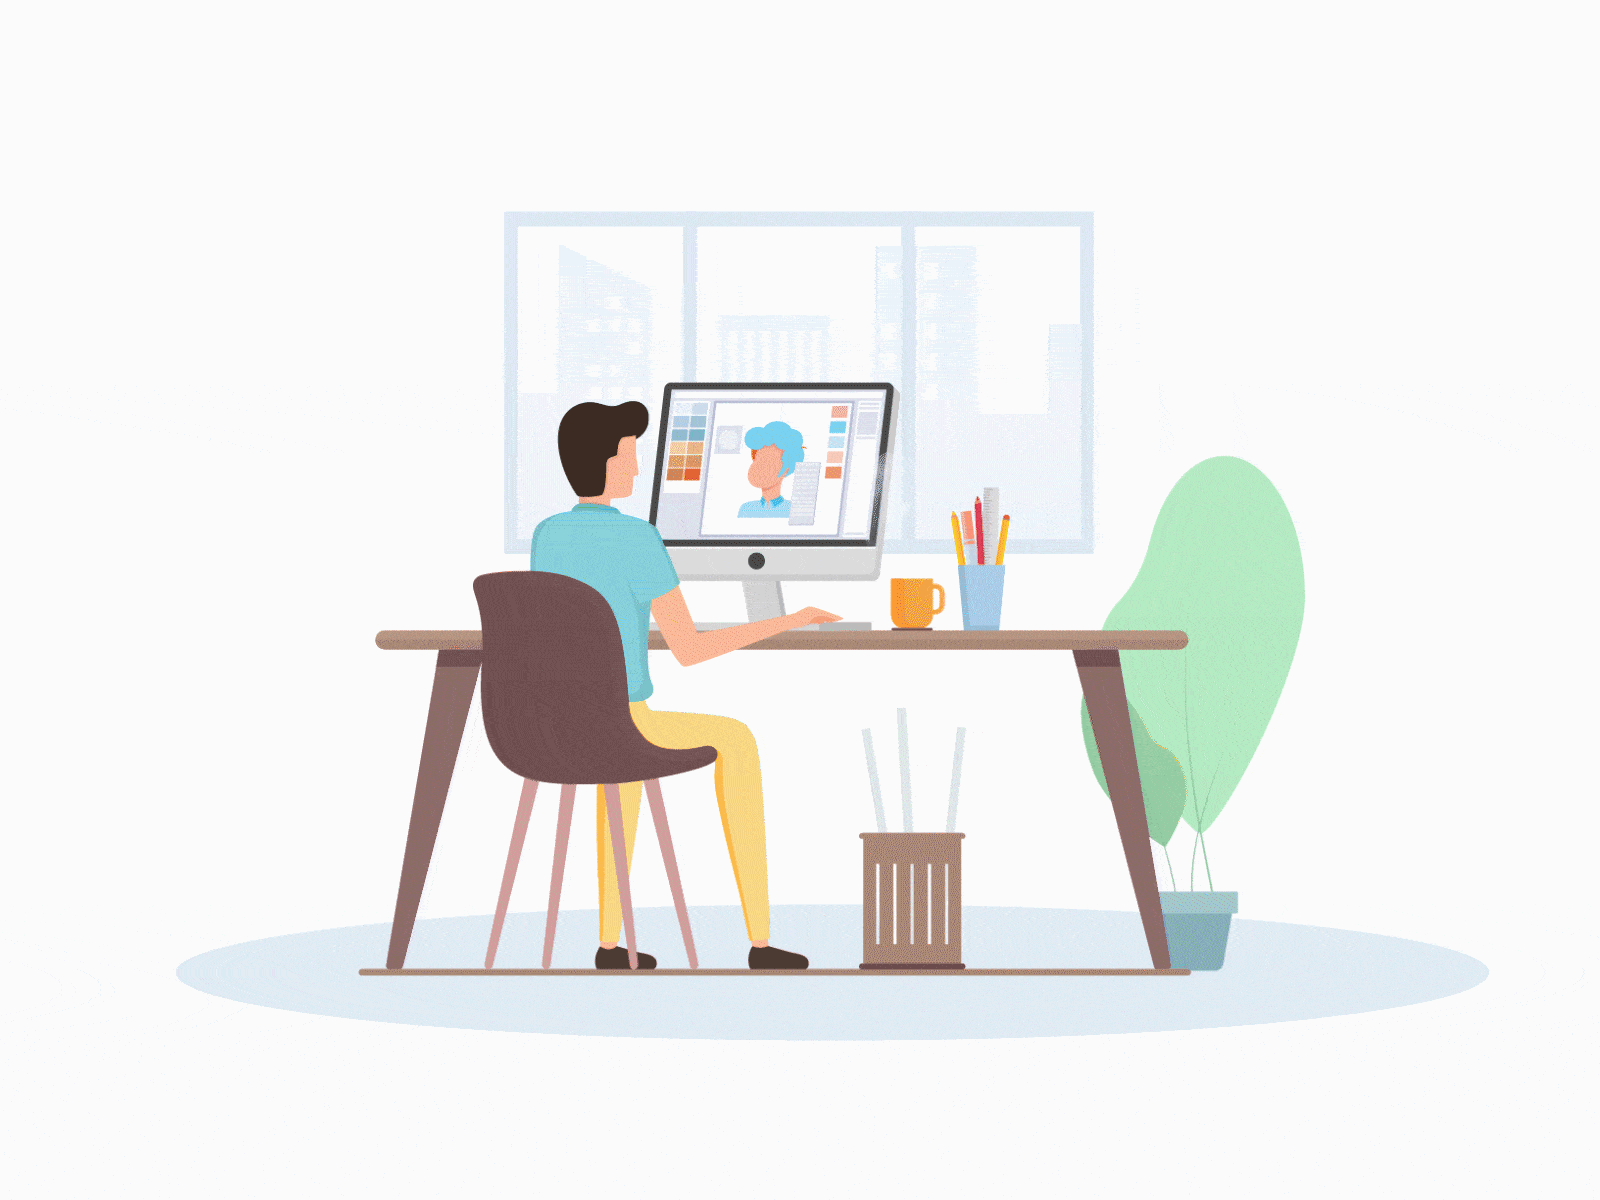 Designer Working Animation by MD. AL AMIN on Dribbble